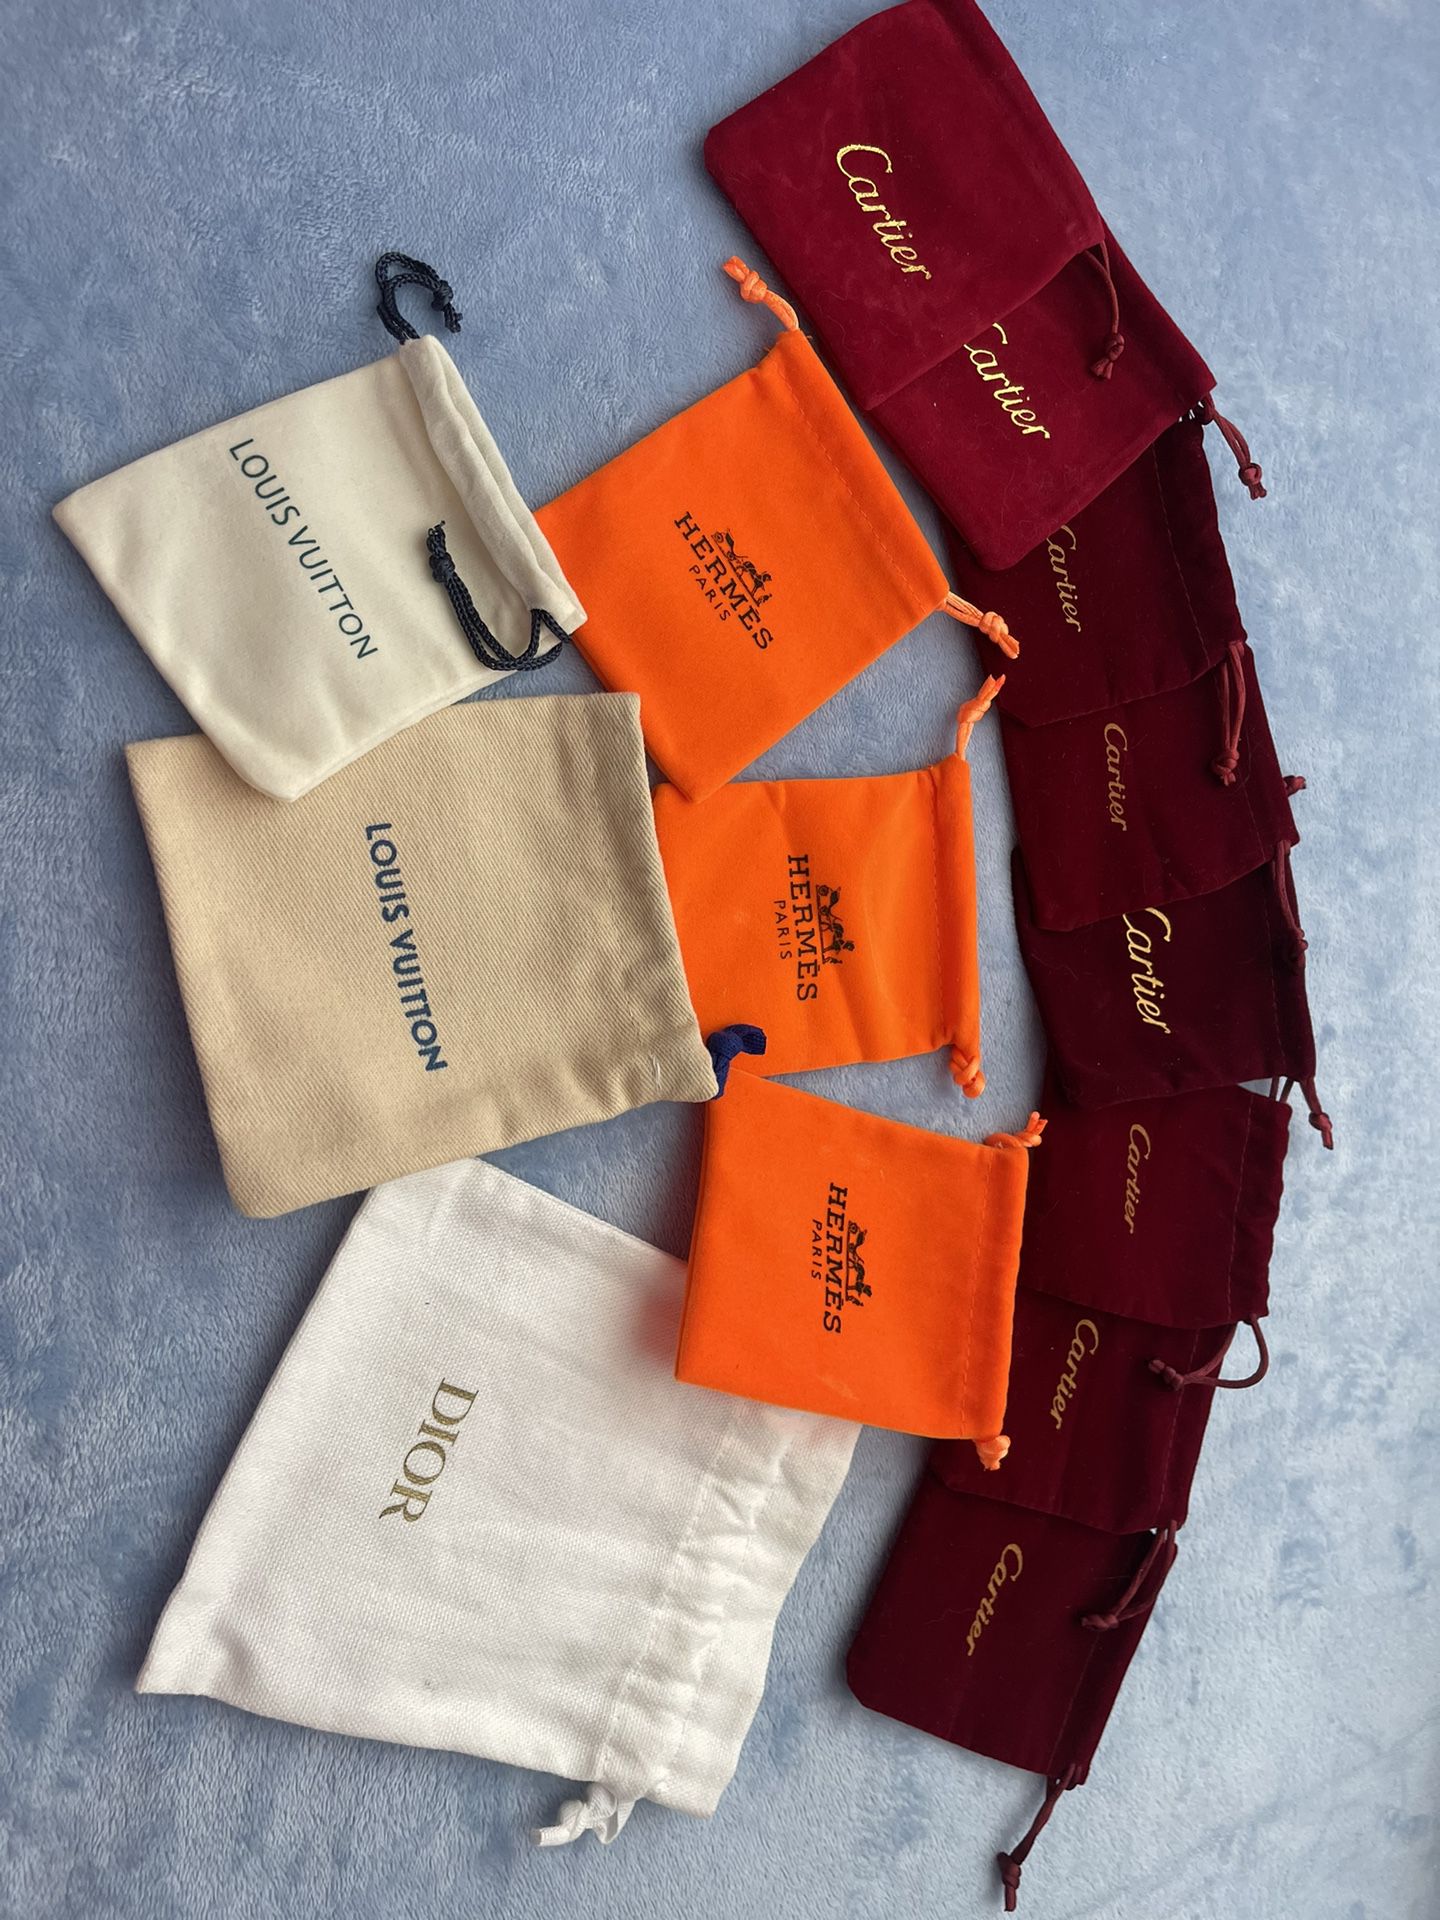 Hermès Chanel Jewelry Or Purse Bags $10